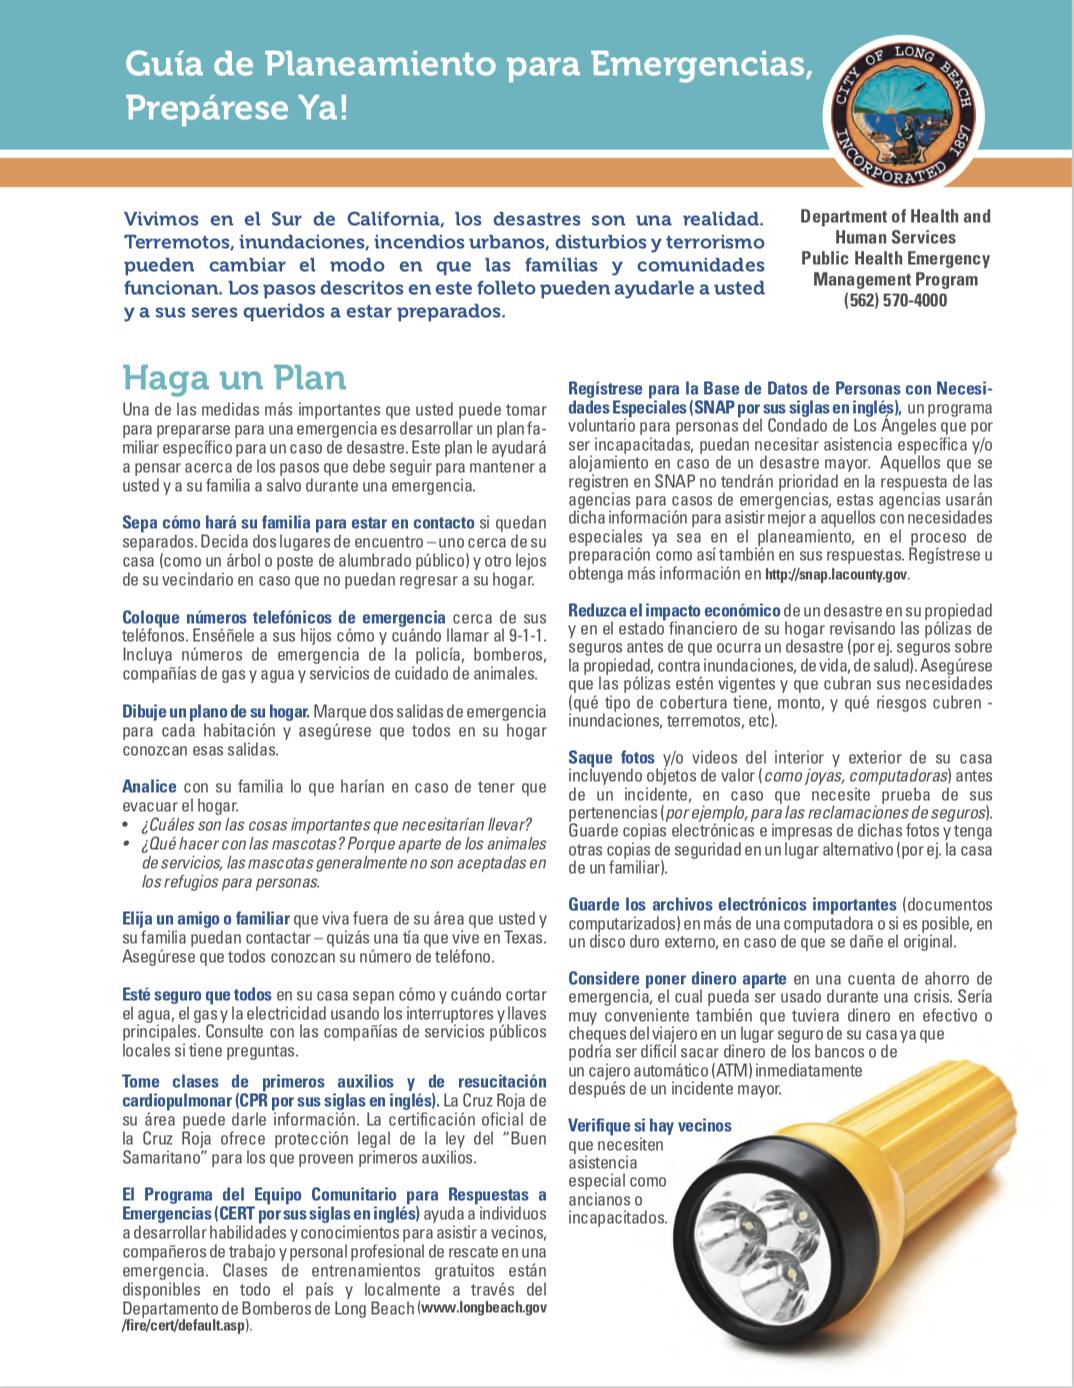 City of Long Beach, Emergency Planning Guide (Spanish)